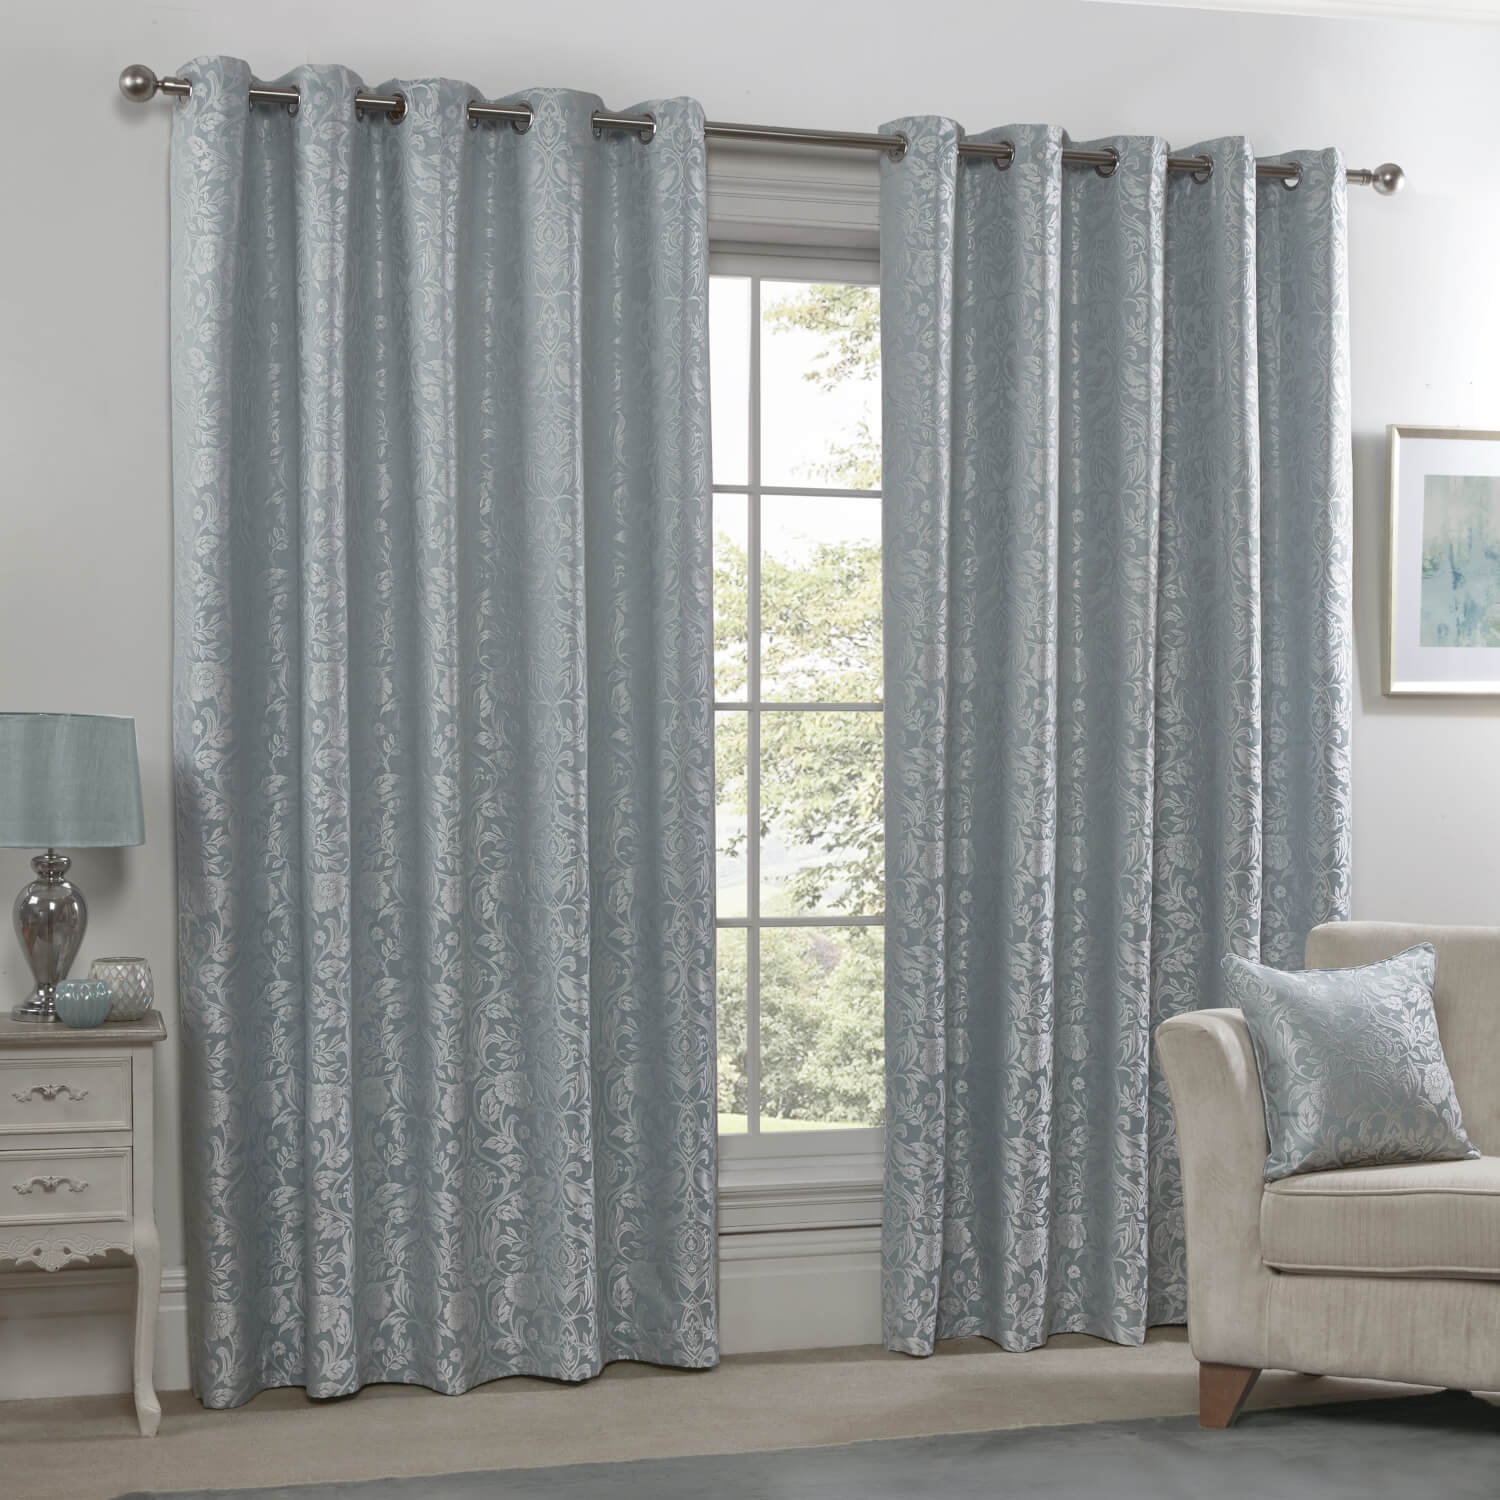 Maison By Emma Barclay Lined Eyelet Jacquard Curtains - Duck Egg 1 Shaws Department Stores